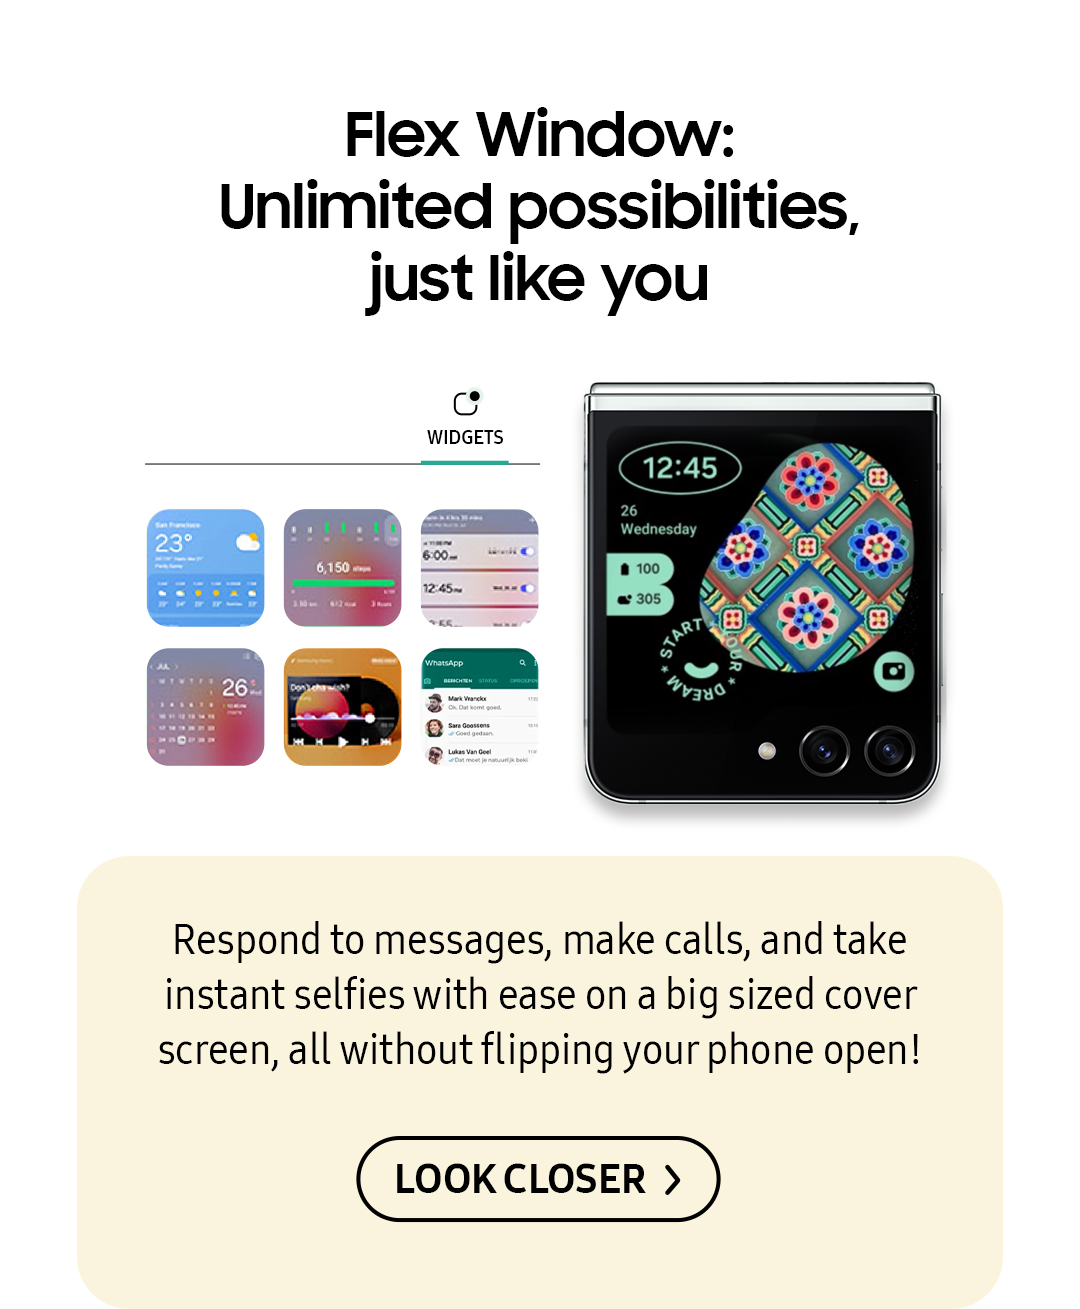 Flex Window: Unlimited possibilities, just like you | Respond to messages, make calls, and take instant selfies wiath ease on a big sized cover screen, all without flipping your phone open! Click here to learn more!